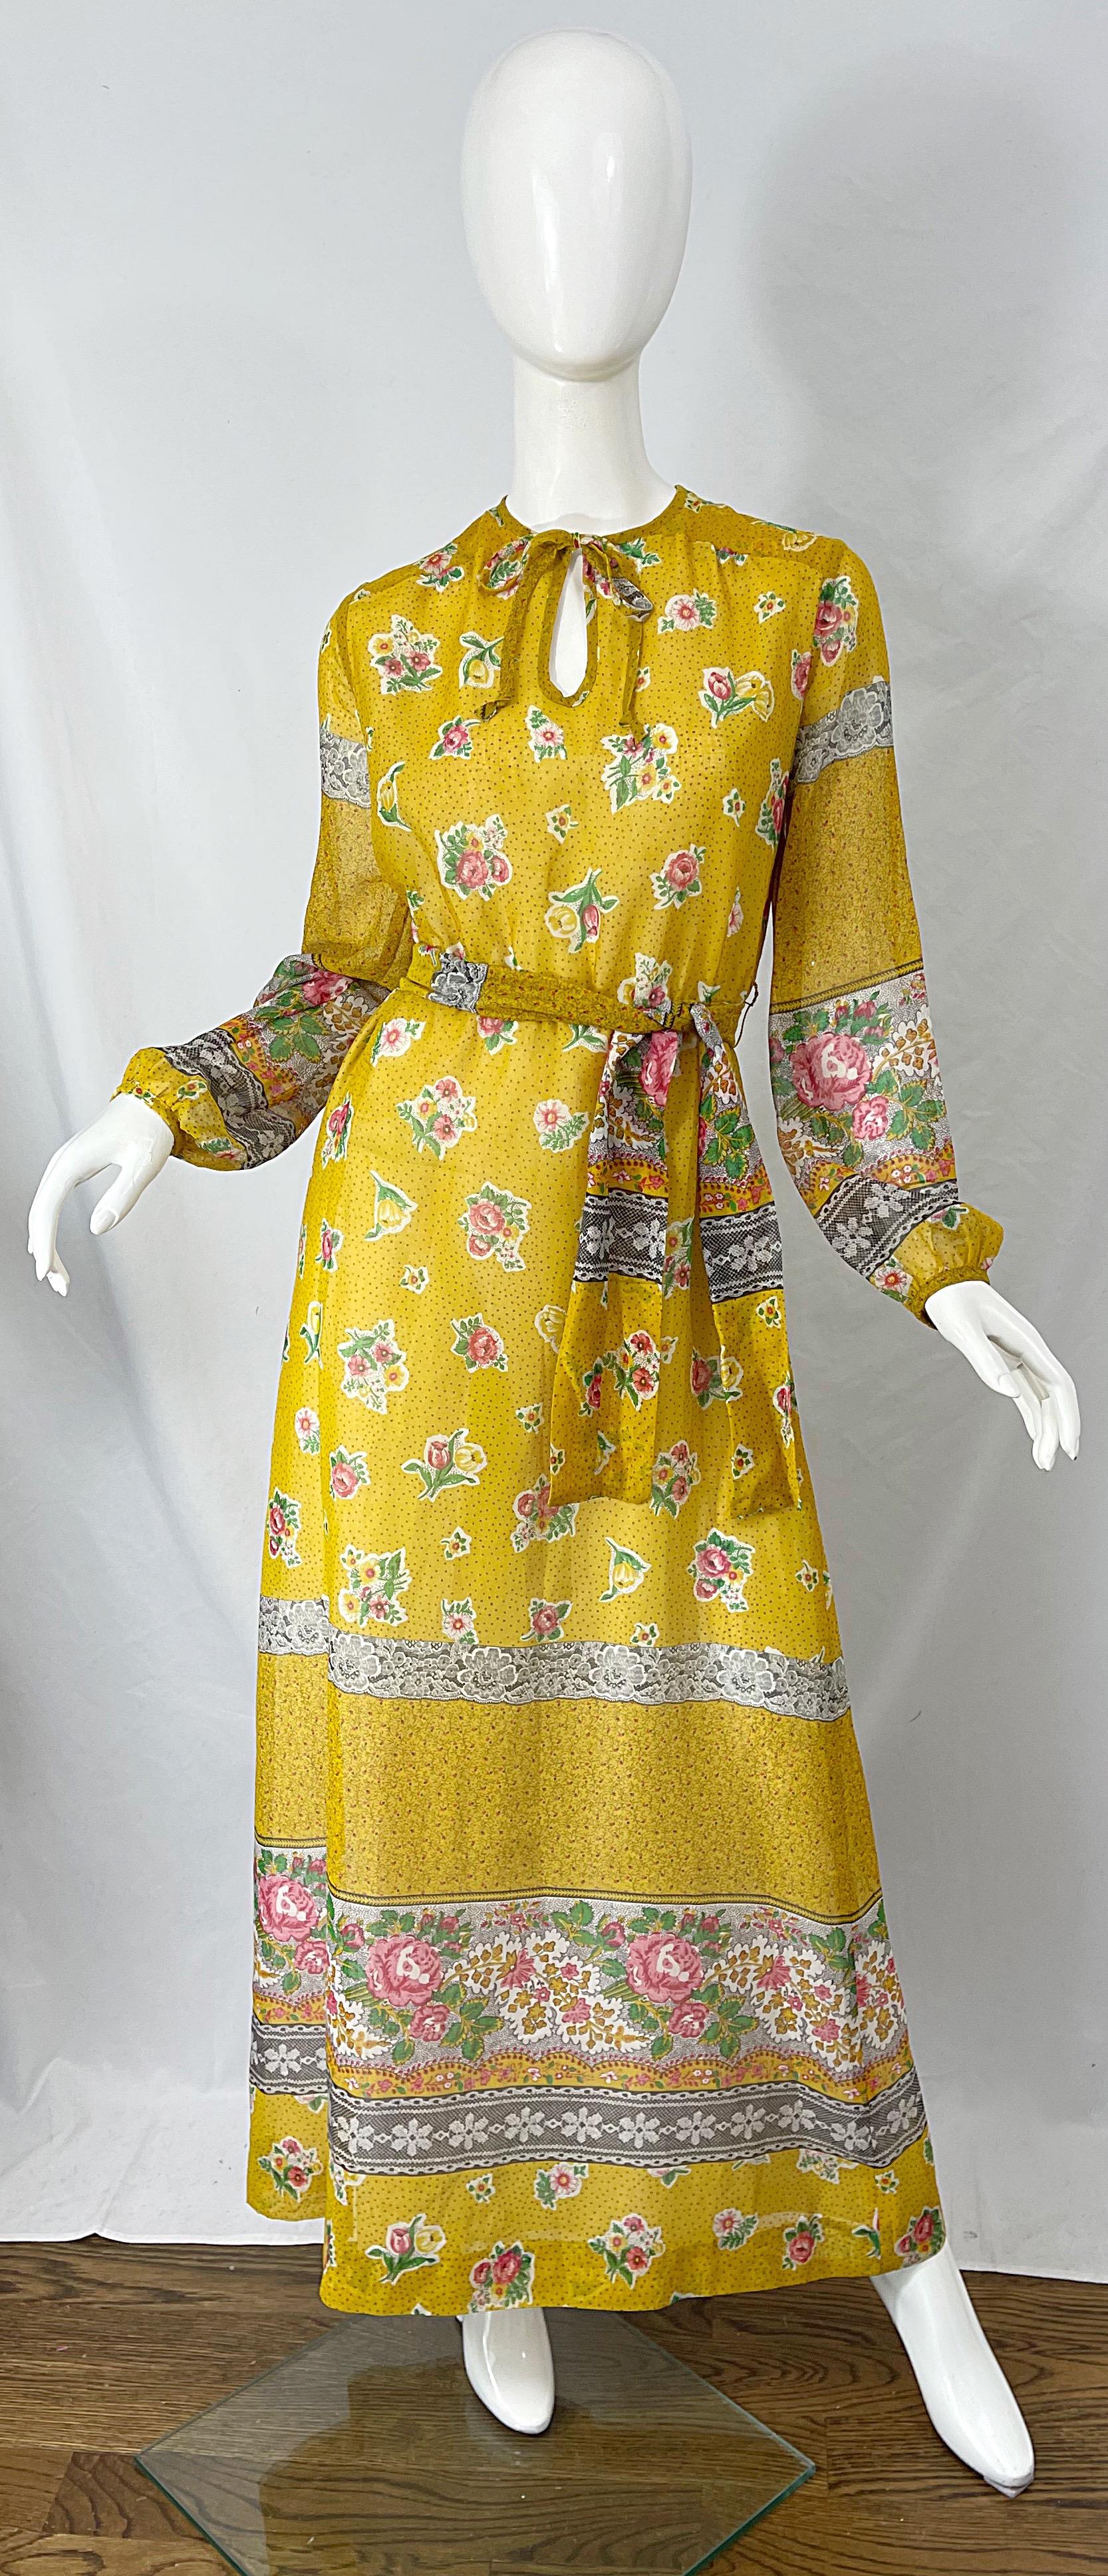 1970s Gay Gibson Trompe L’Oeil Lace Print Yellow Cotton Voile 70s Maxi Dress For Sale 5